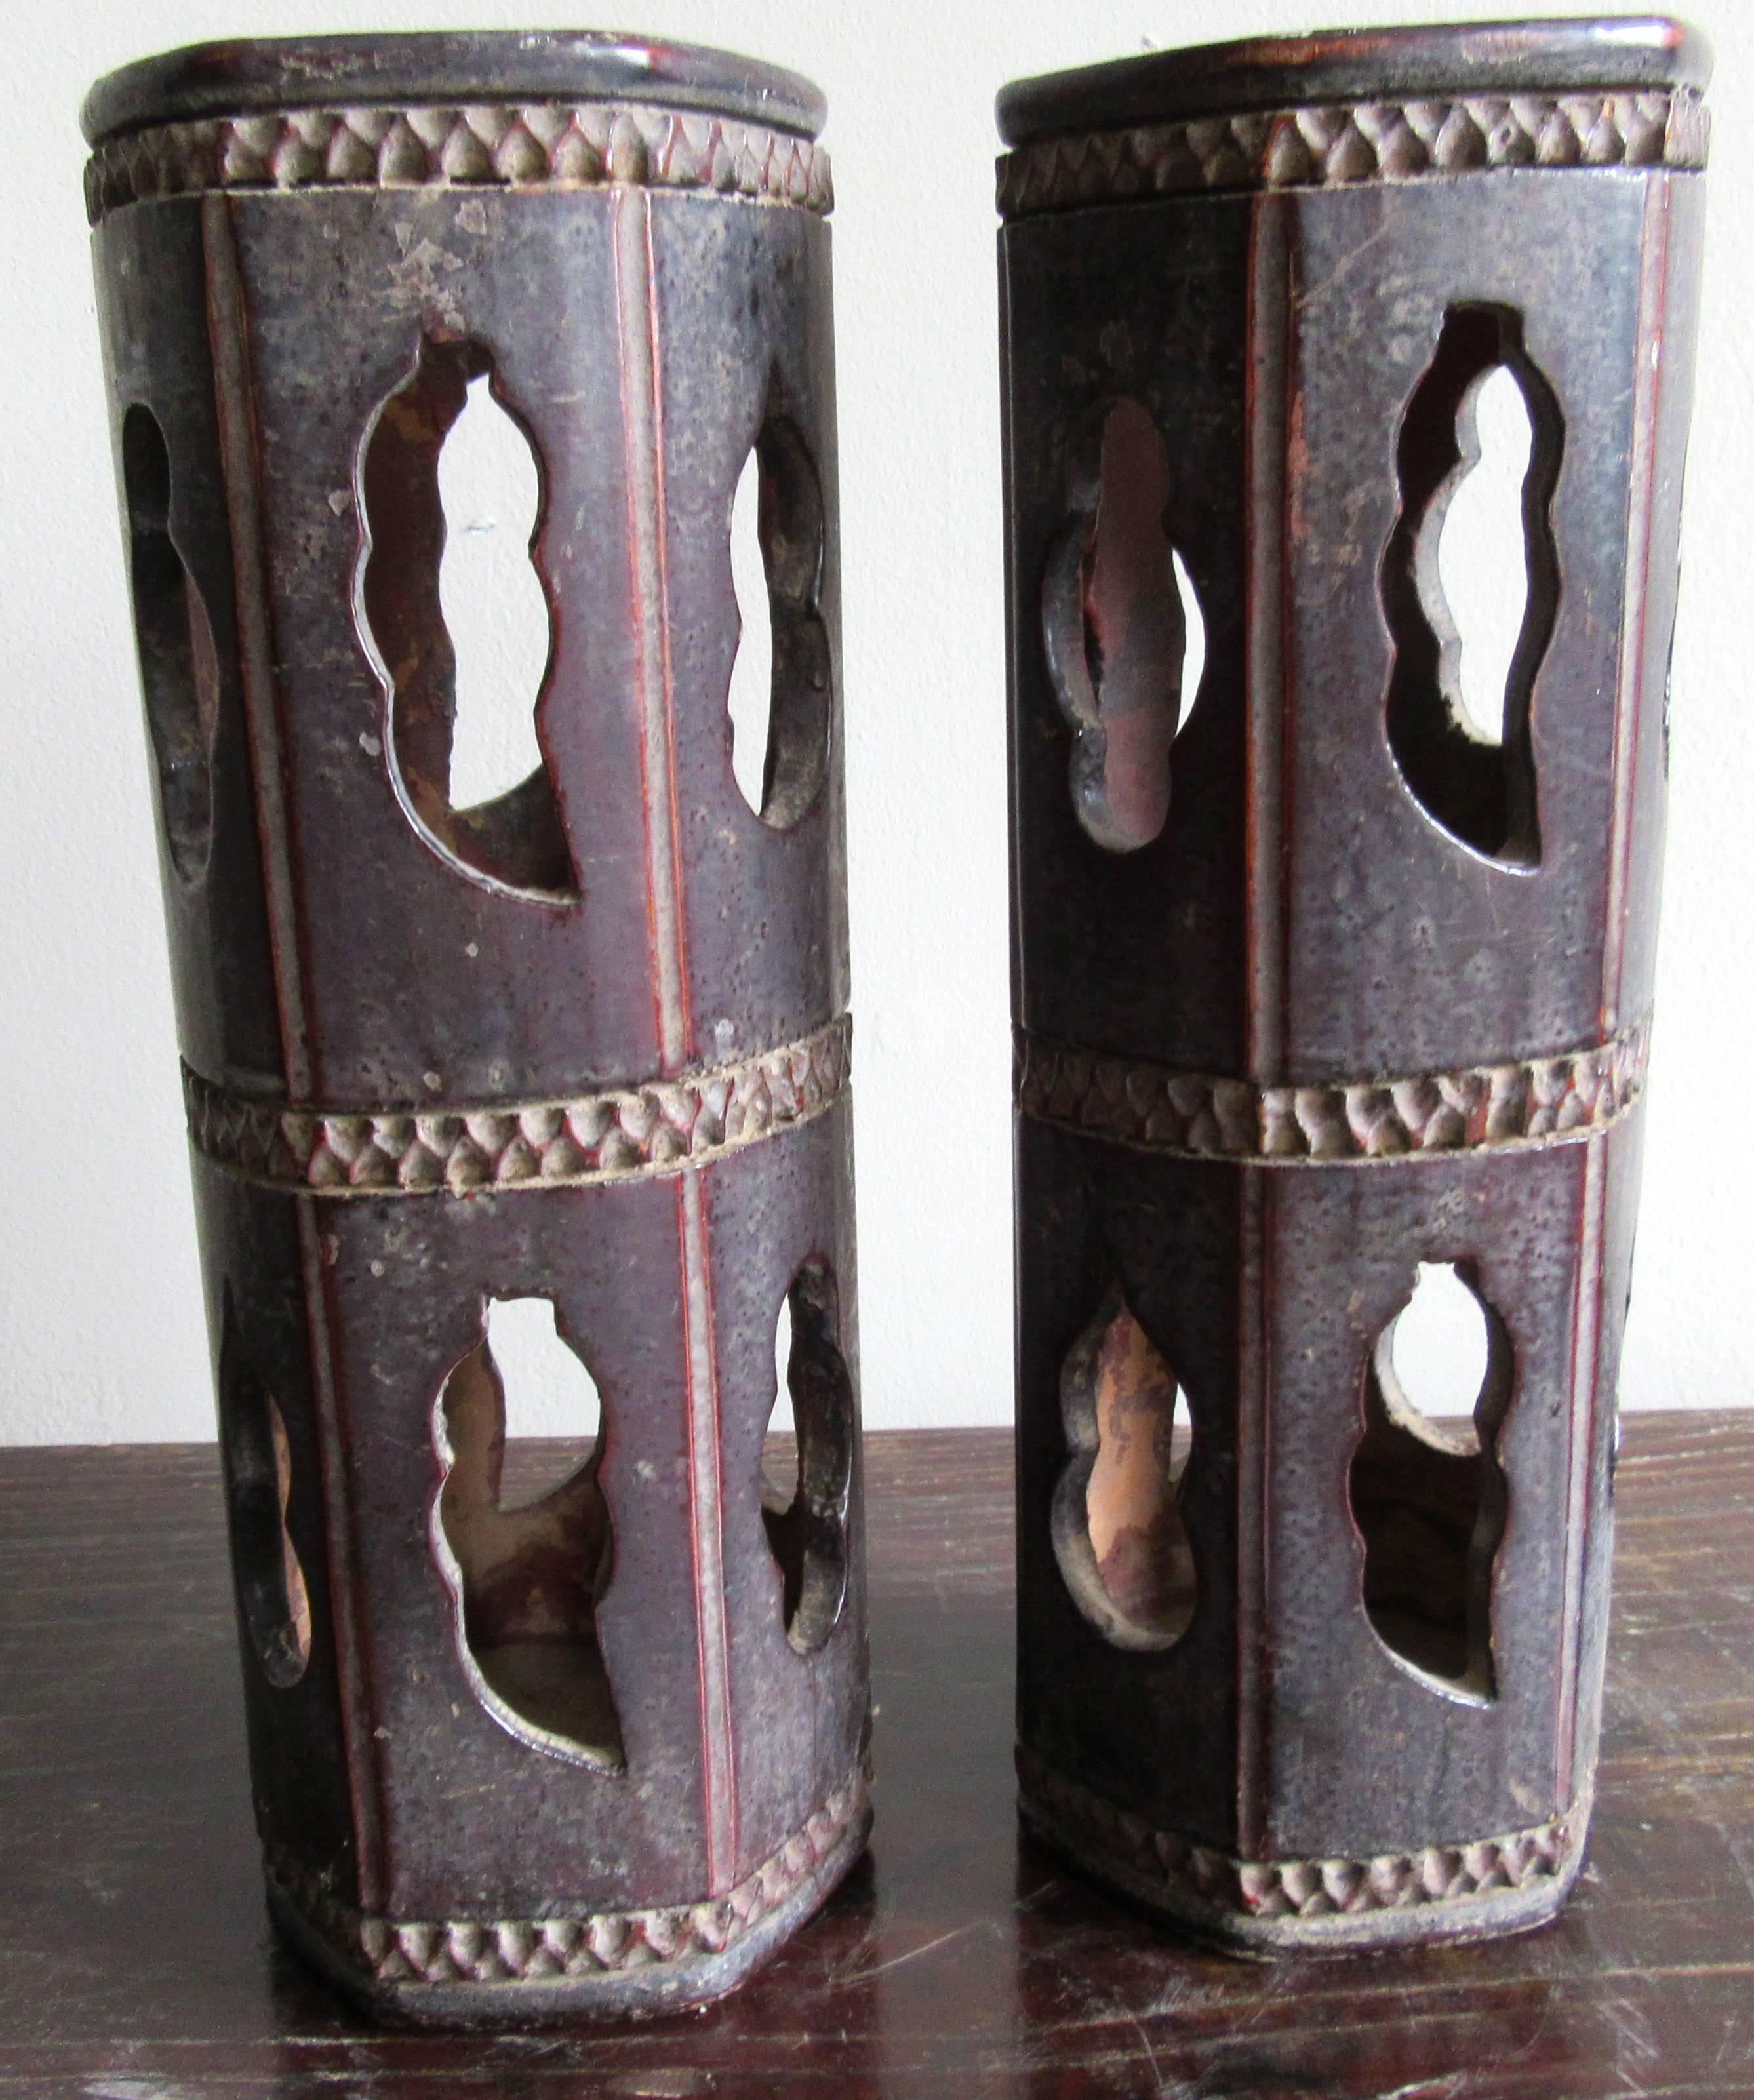 Pair of lacquered bamboo small hat stands, hand-carved and hexagonal in shape. Exotic objets complimenting any style of decor.